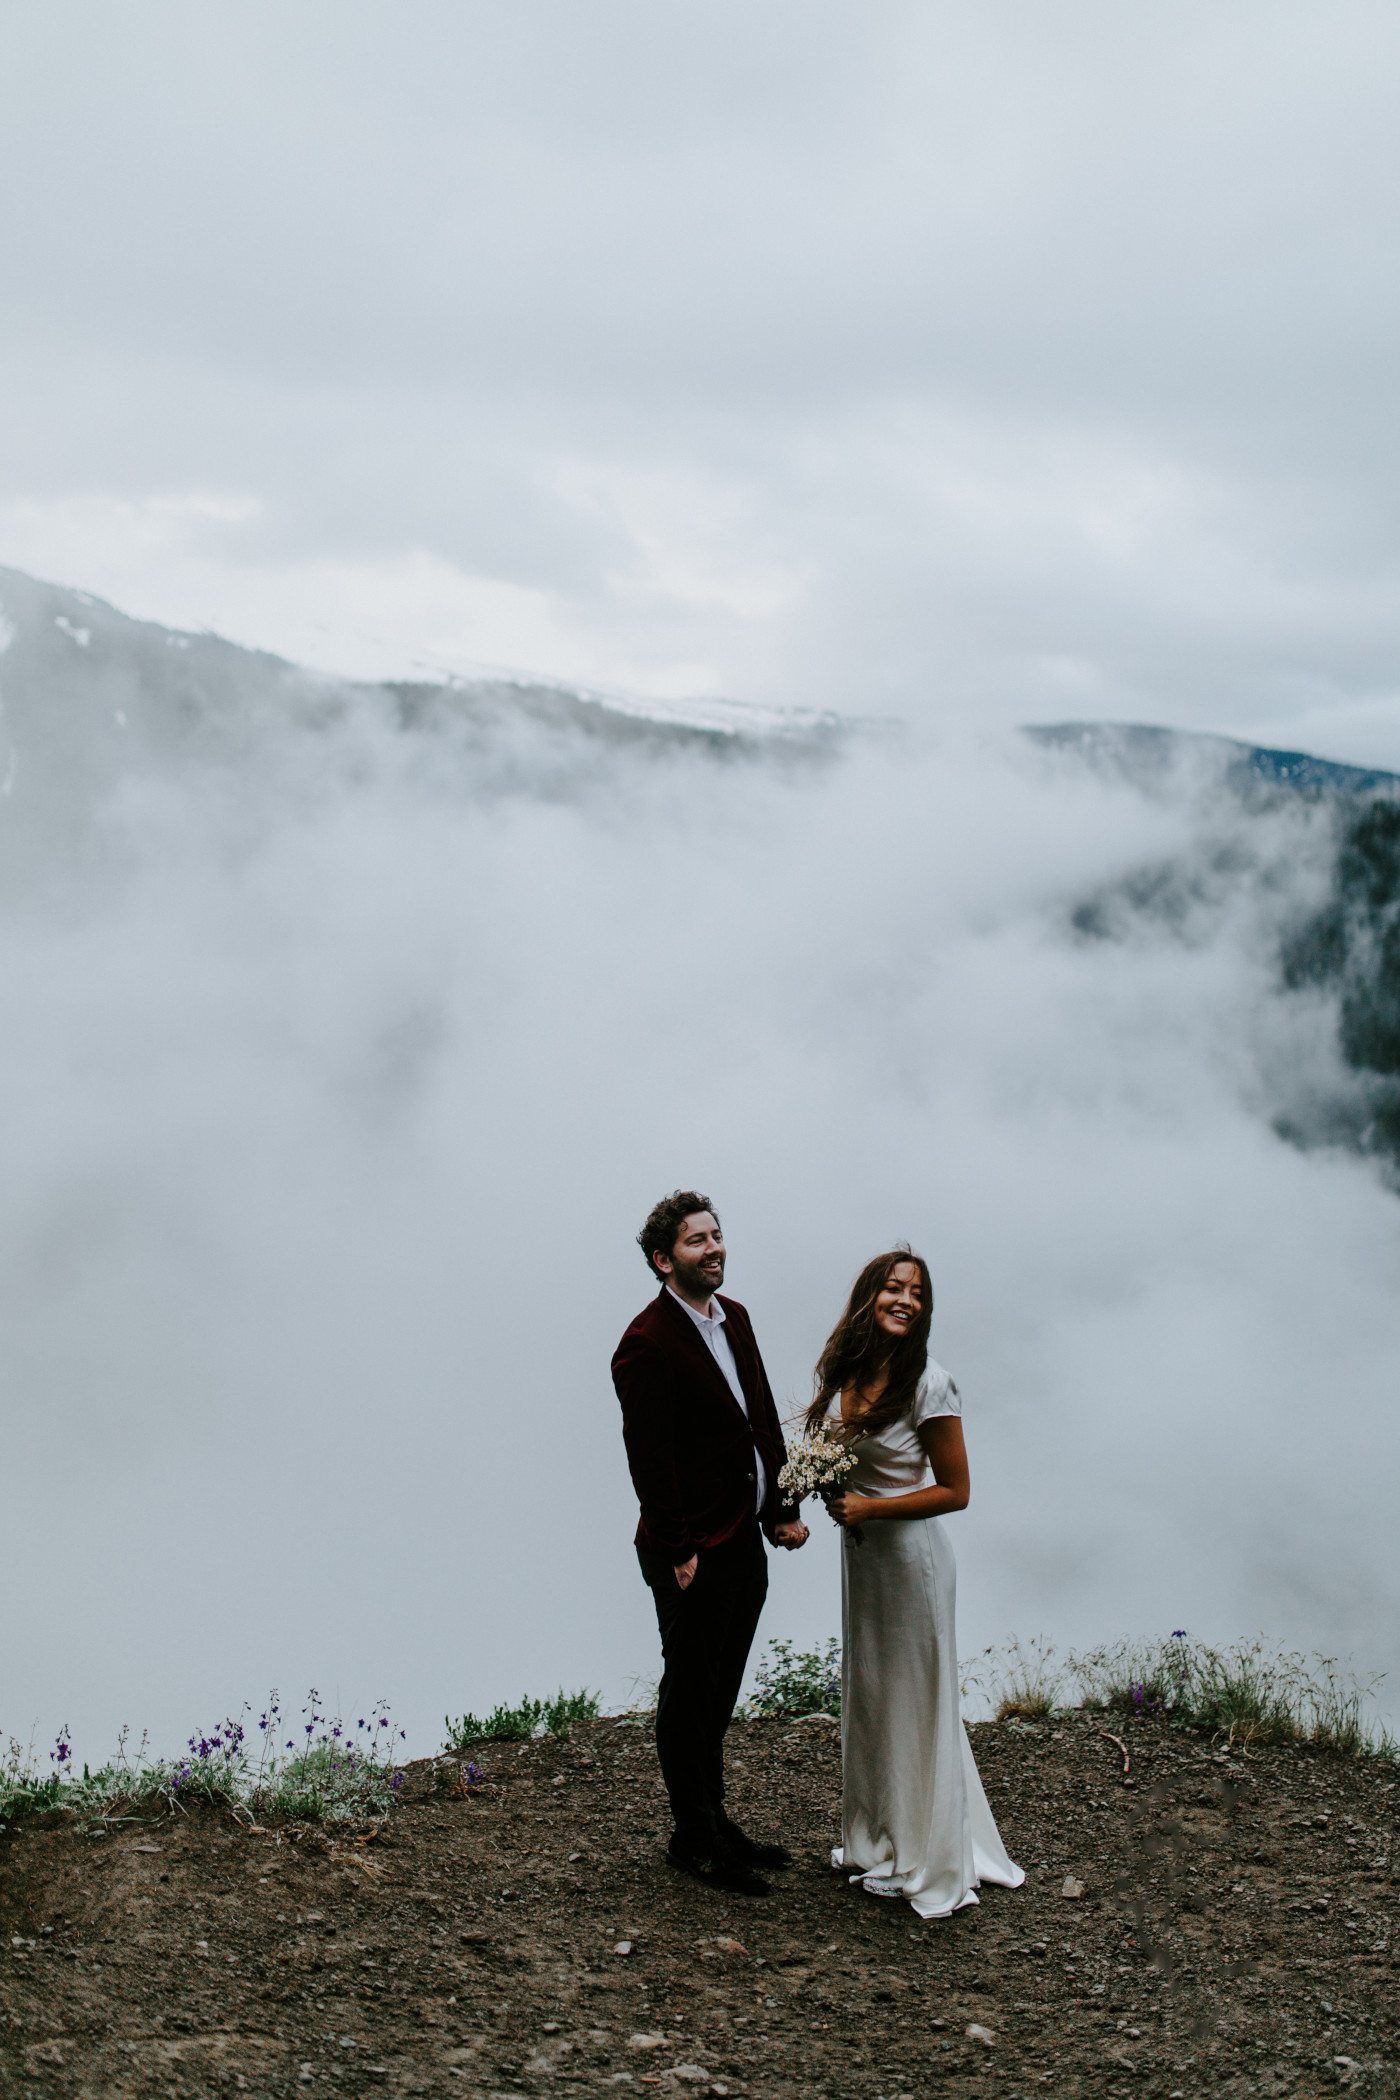 Katelyn and Murray listen to their officiant. Elopement wedding photography at Mount Hood by Sienna Plus Josh.